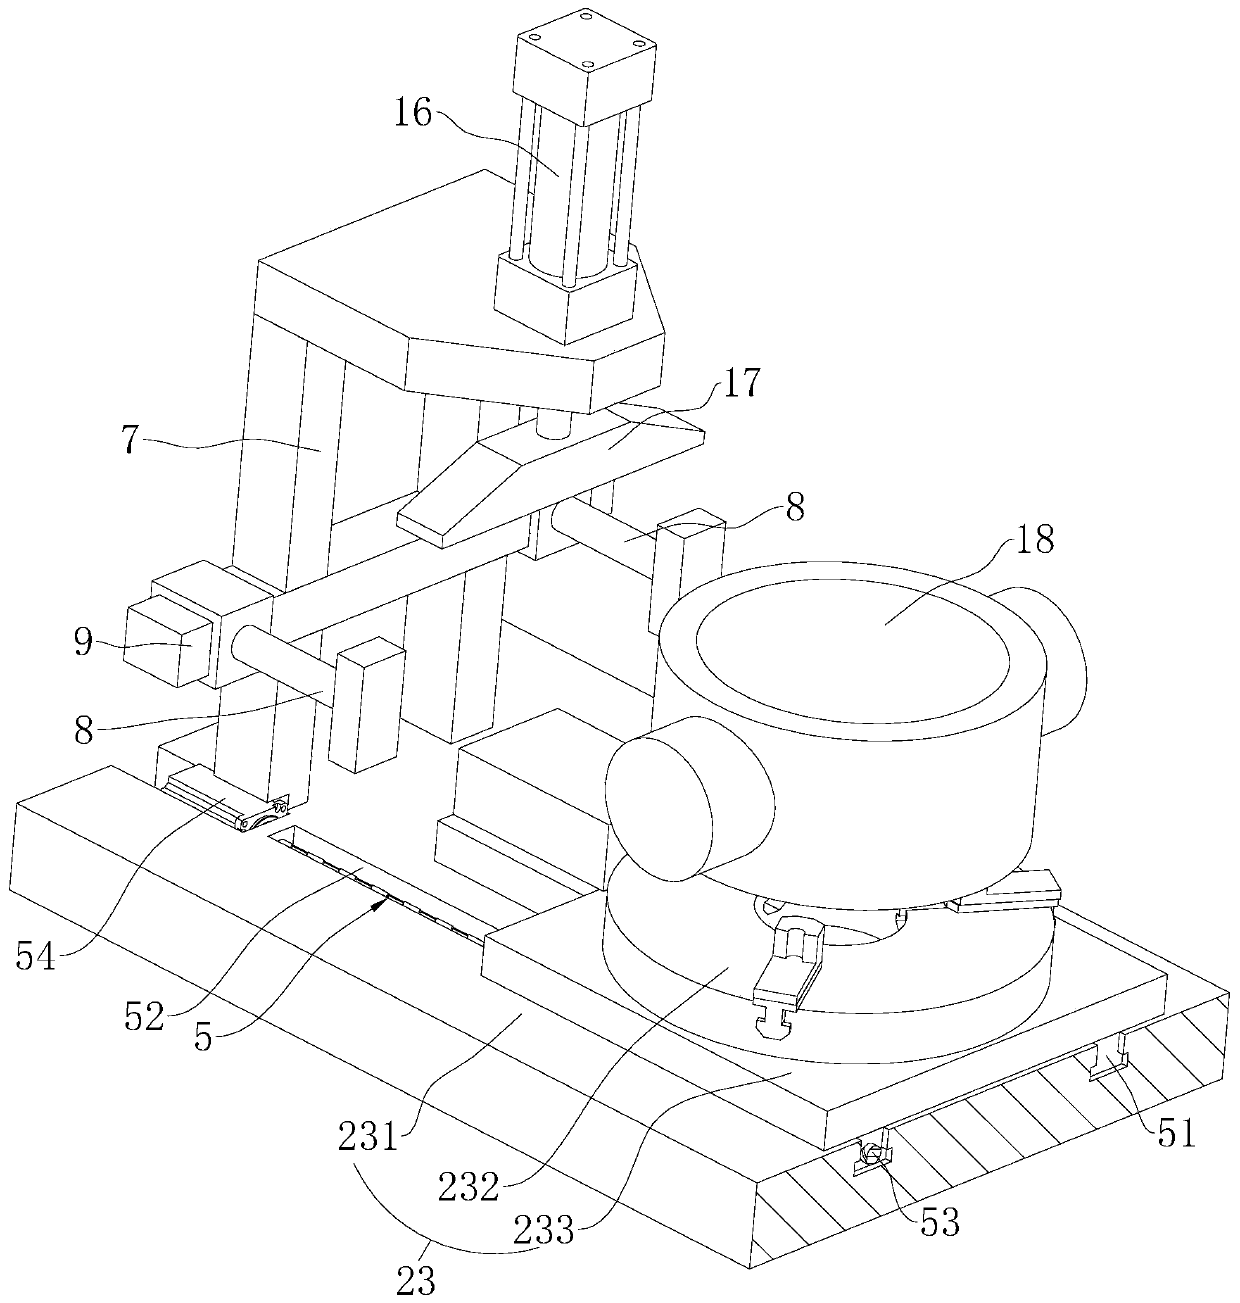 Production device of hinge shafts